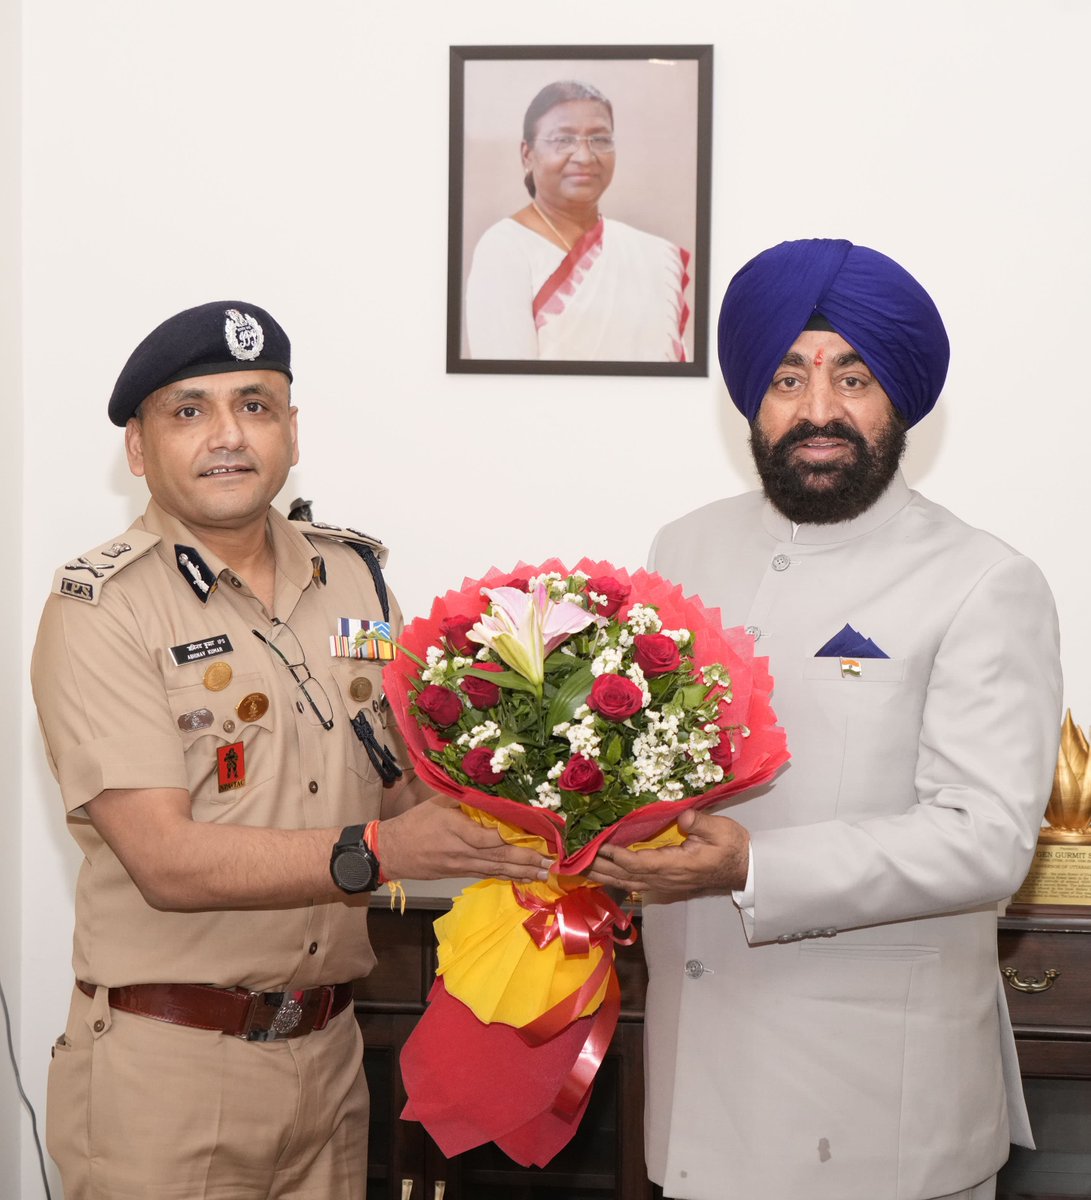 It is always a pleasure & a privilege to call on the Hon’ble Governor of Uttarakhand @LtGenGurmit The latest interaction was marked by his high praise for the role of Uttarakhand Police in the Lok Sabha elections on April 19th. His words will always inspire us to greater heights.